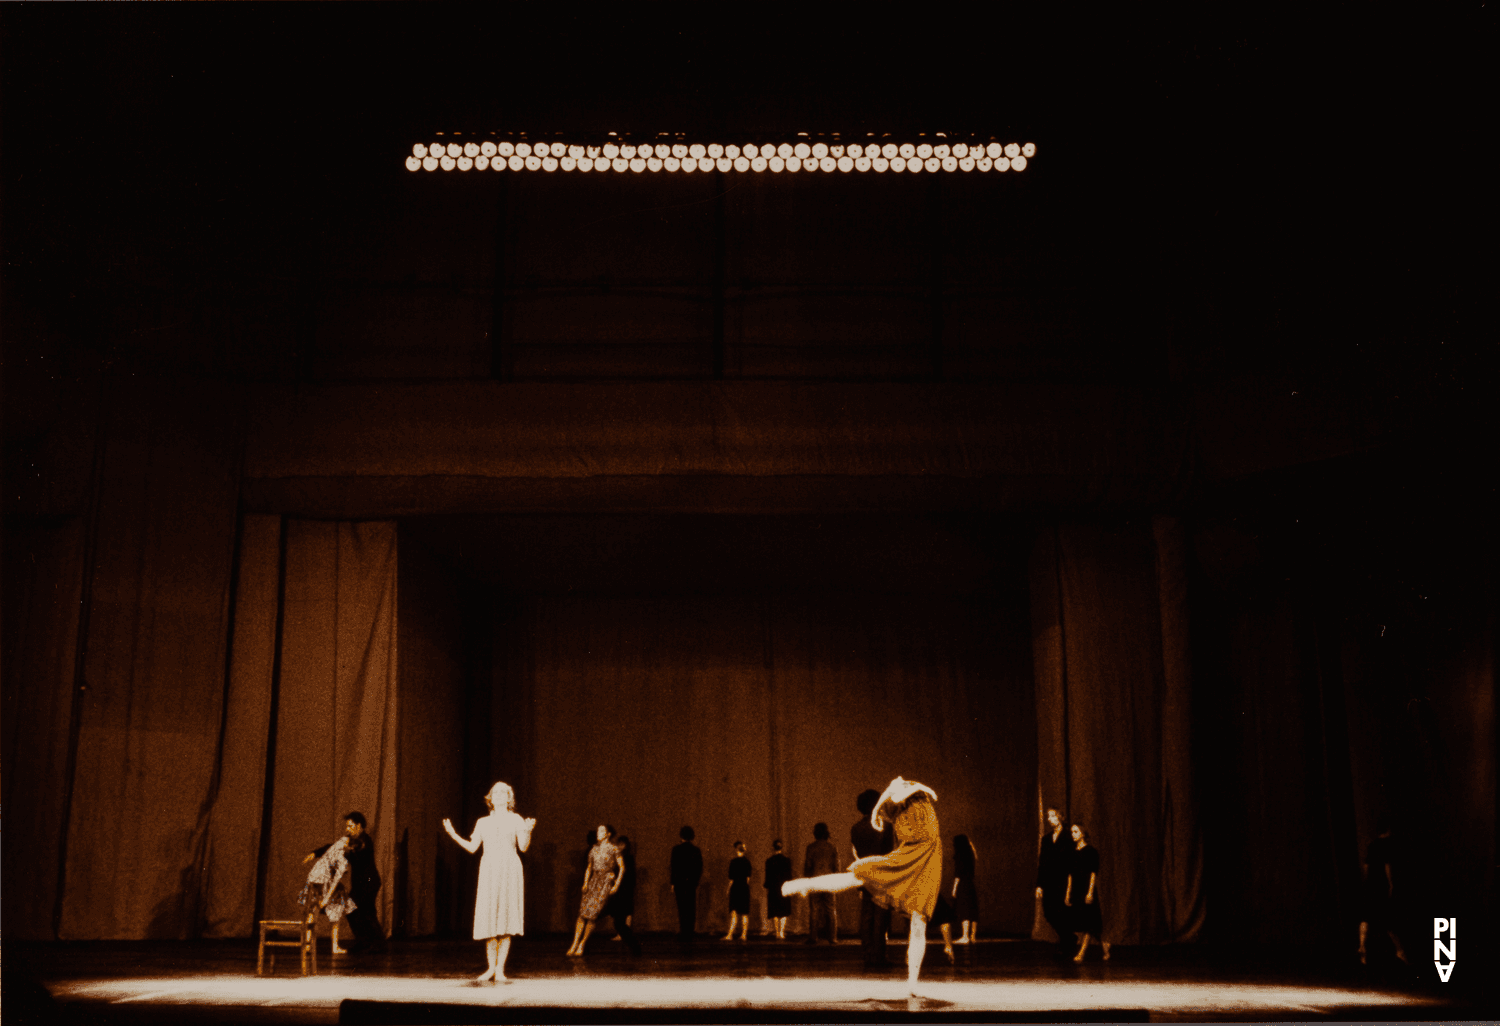 “Adagio – Five Songs by Gustav Mahler” by Pina Bausch